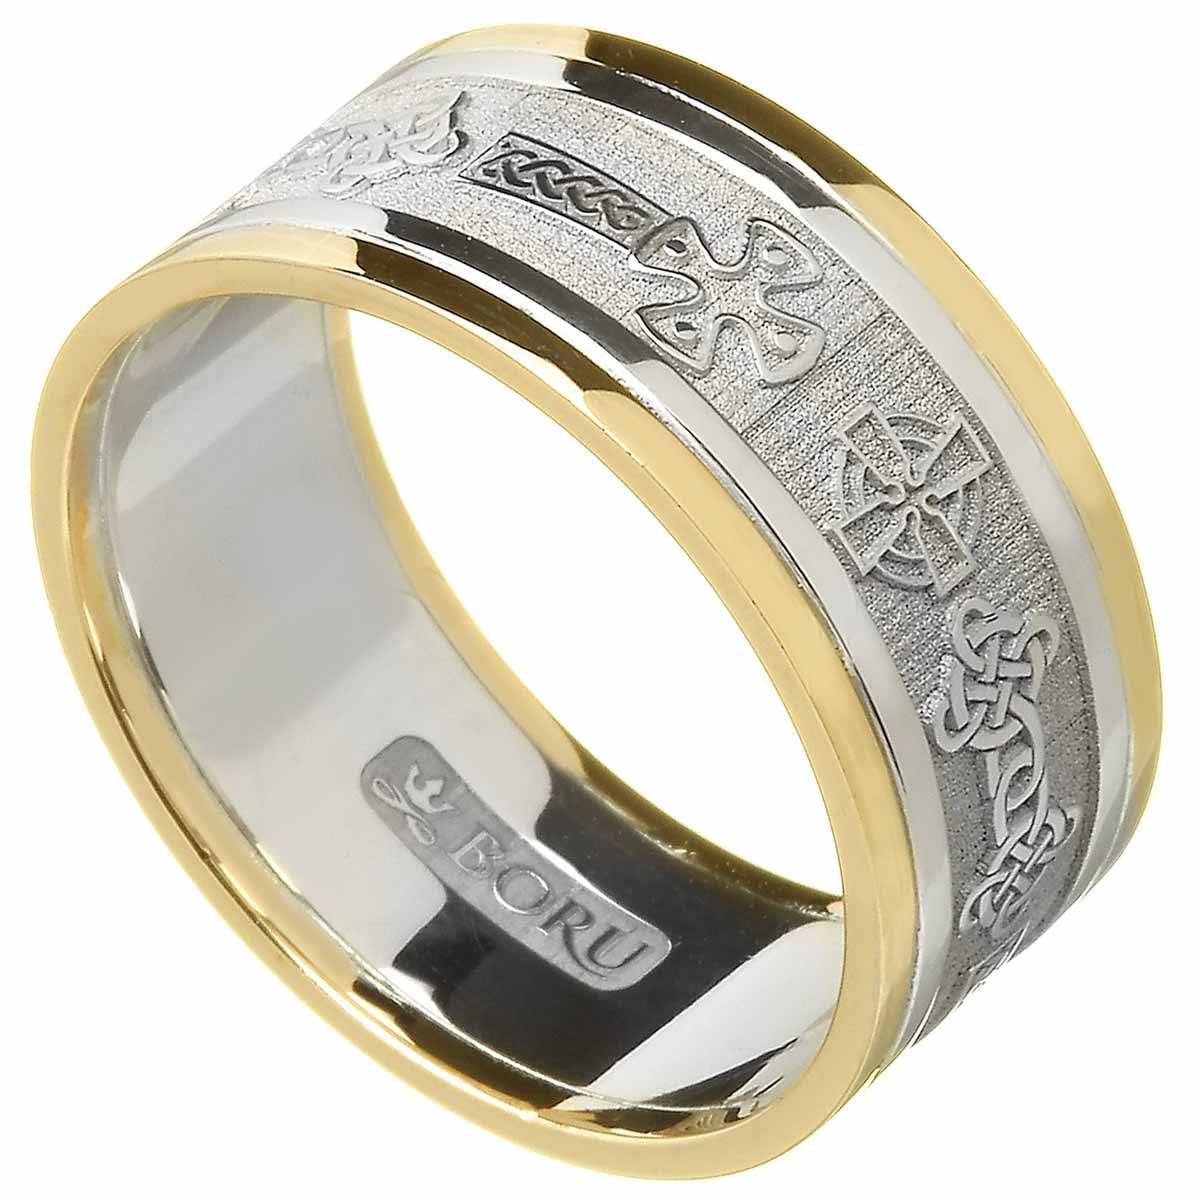 Product image for Celtic Ring - Men's White Gold with Yellow Gold Trim Celtic Cross Wedding Ring